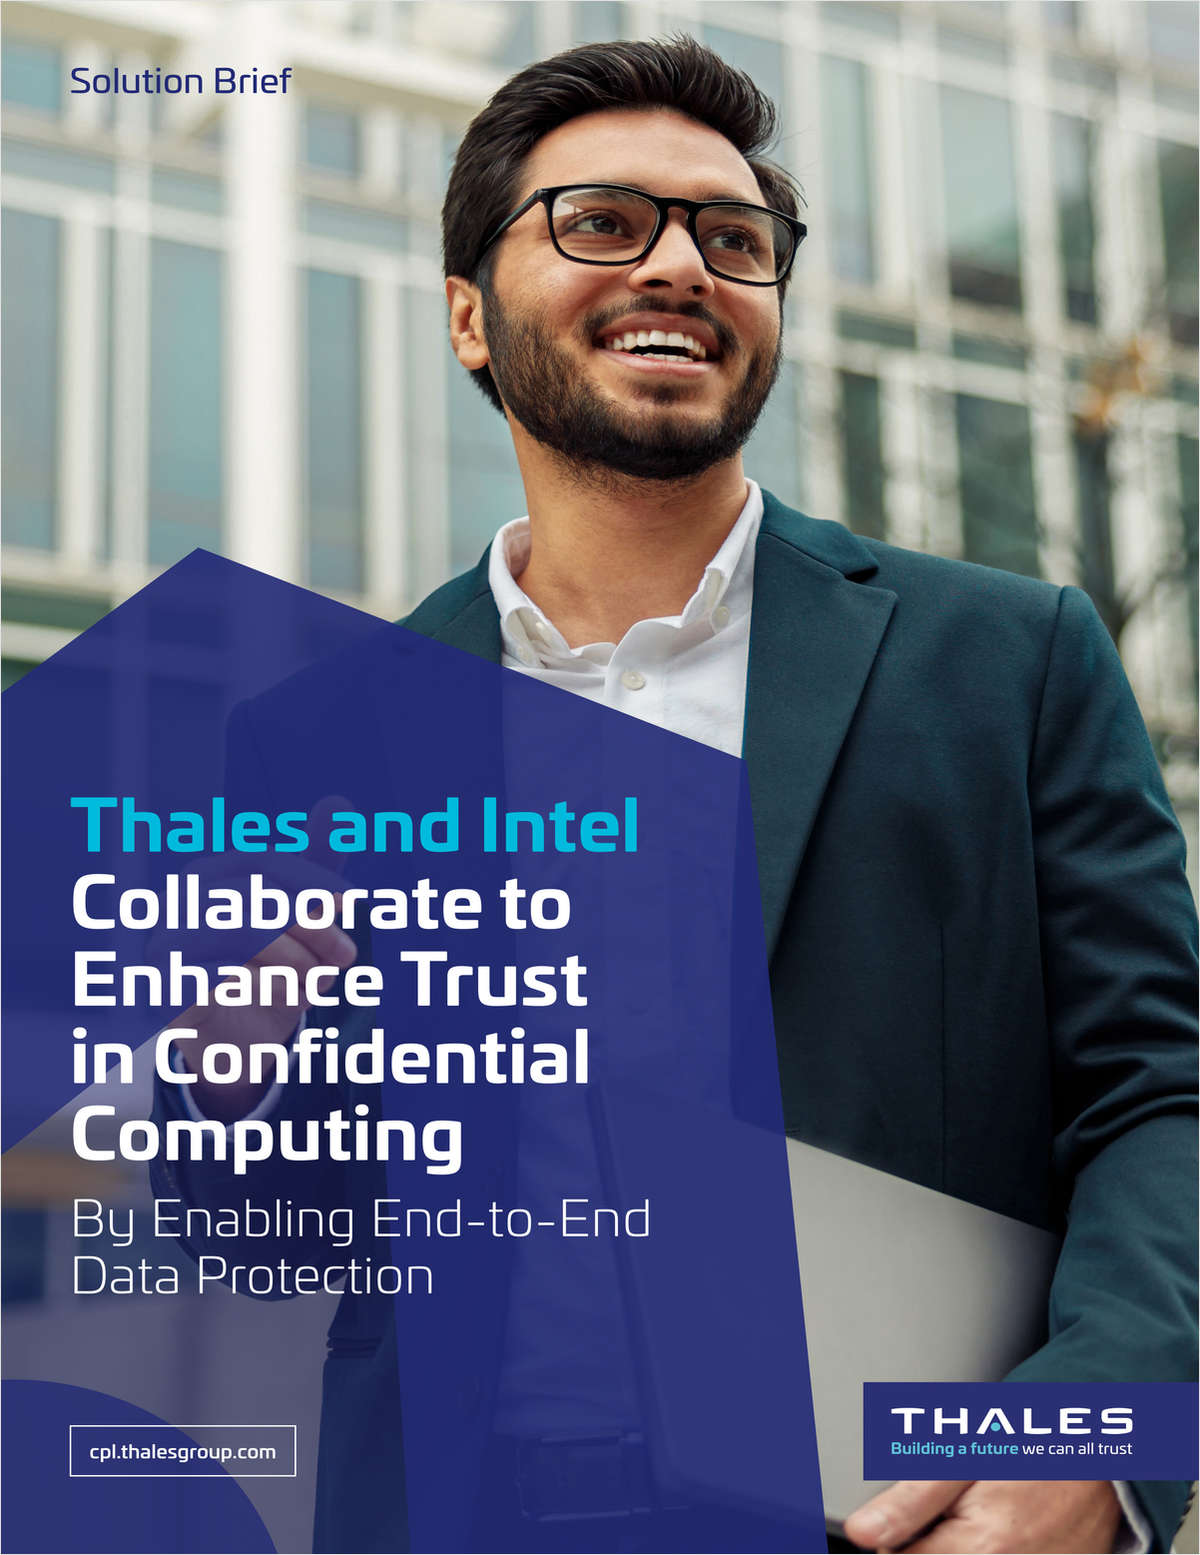 Thales and Intel Collaborate to Enhance Trust in Confidential Computing